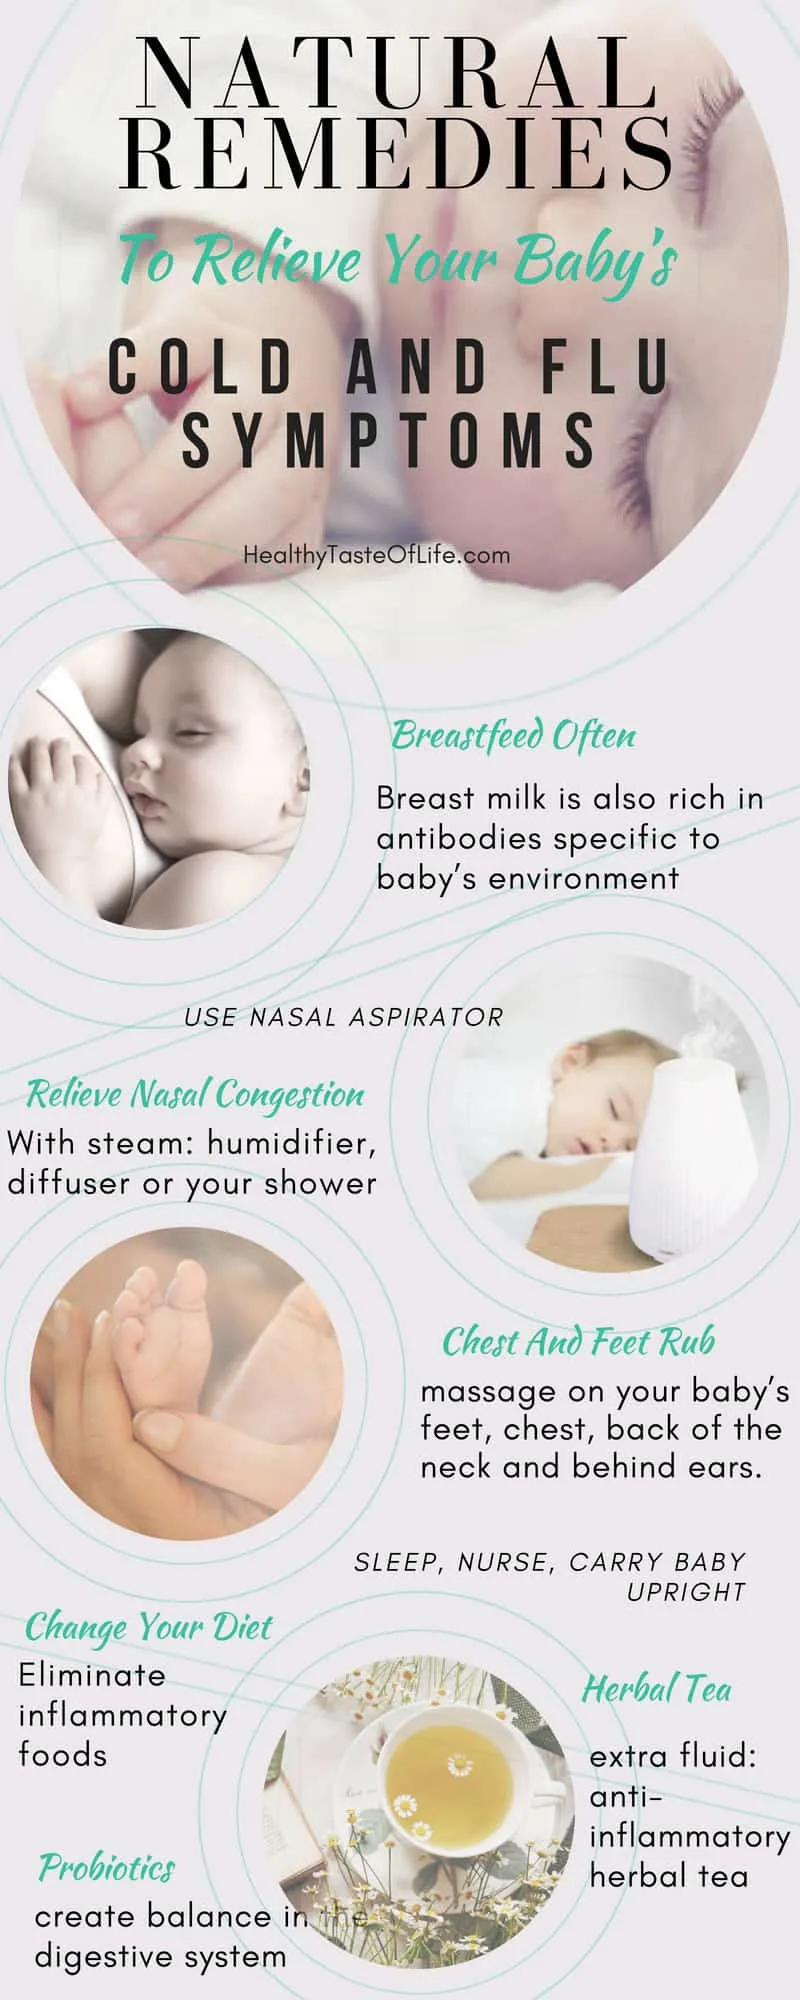 10 Natural Home Remedies For Baby Cold And Flu - try these home remedies for a baby cold as soon as you notice the symptoms.       